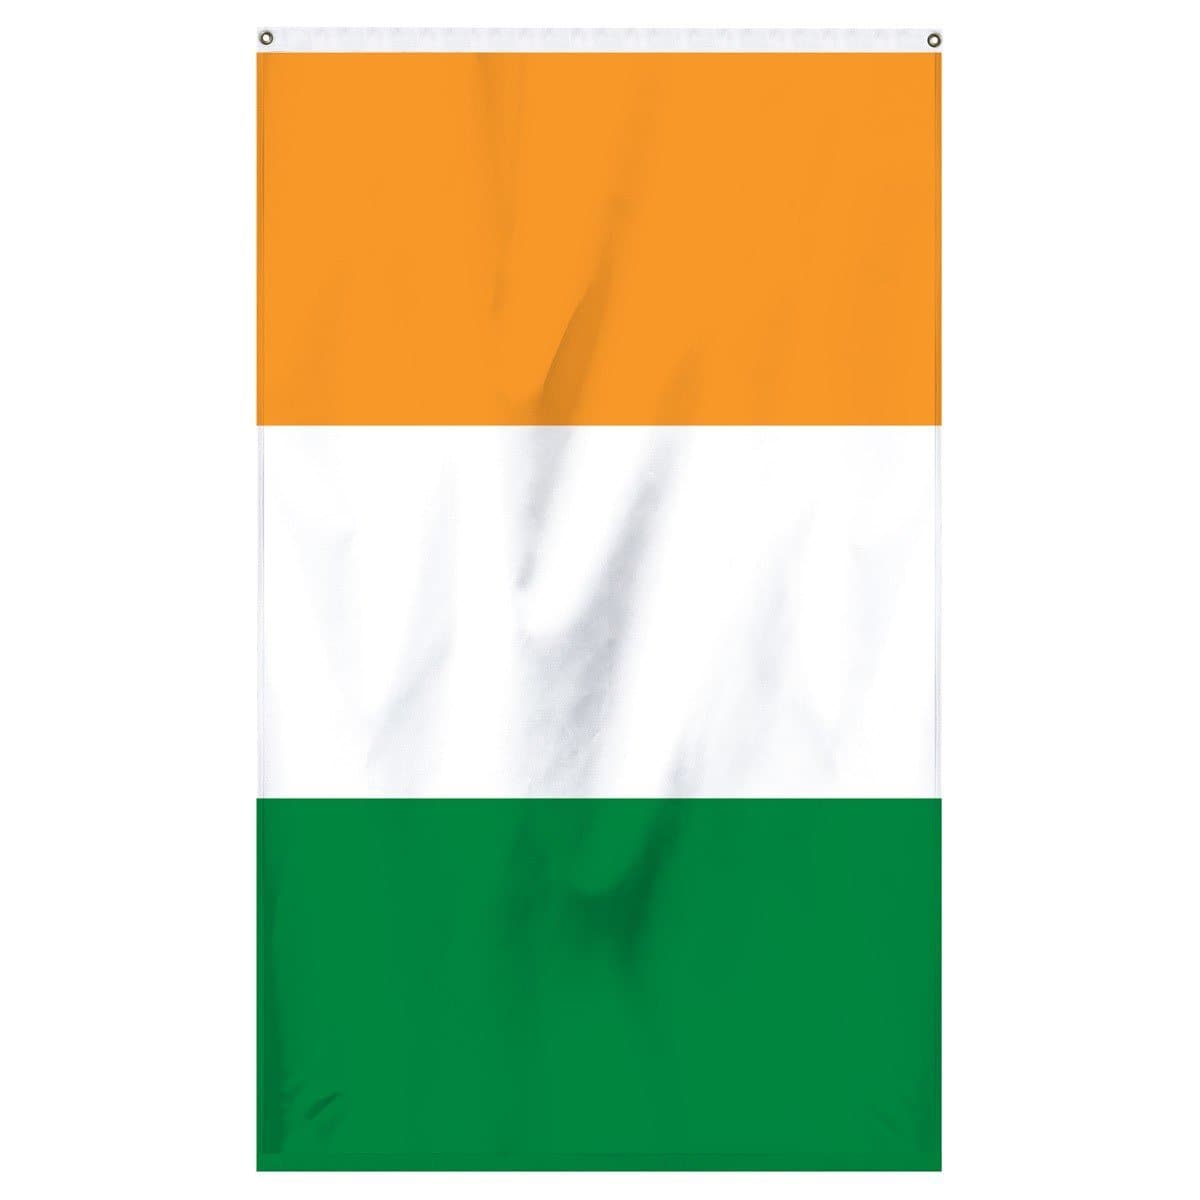 The Ivory Coast flag for sale online for parades, flagpoles, and collectors